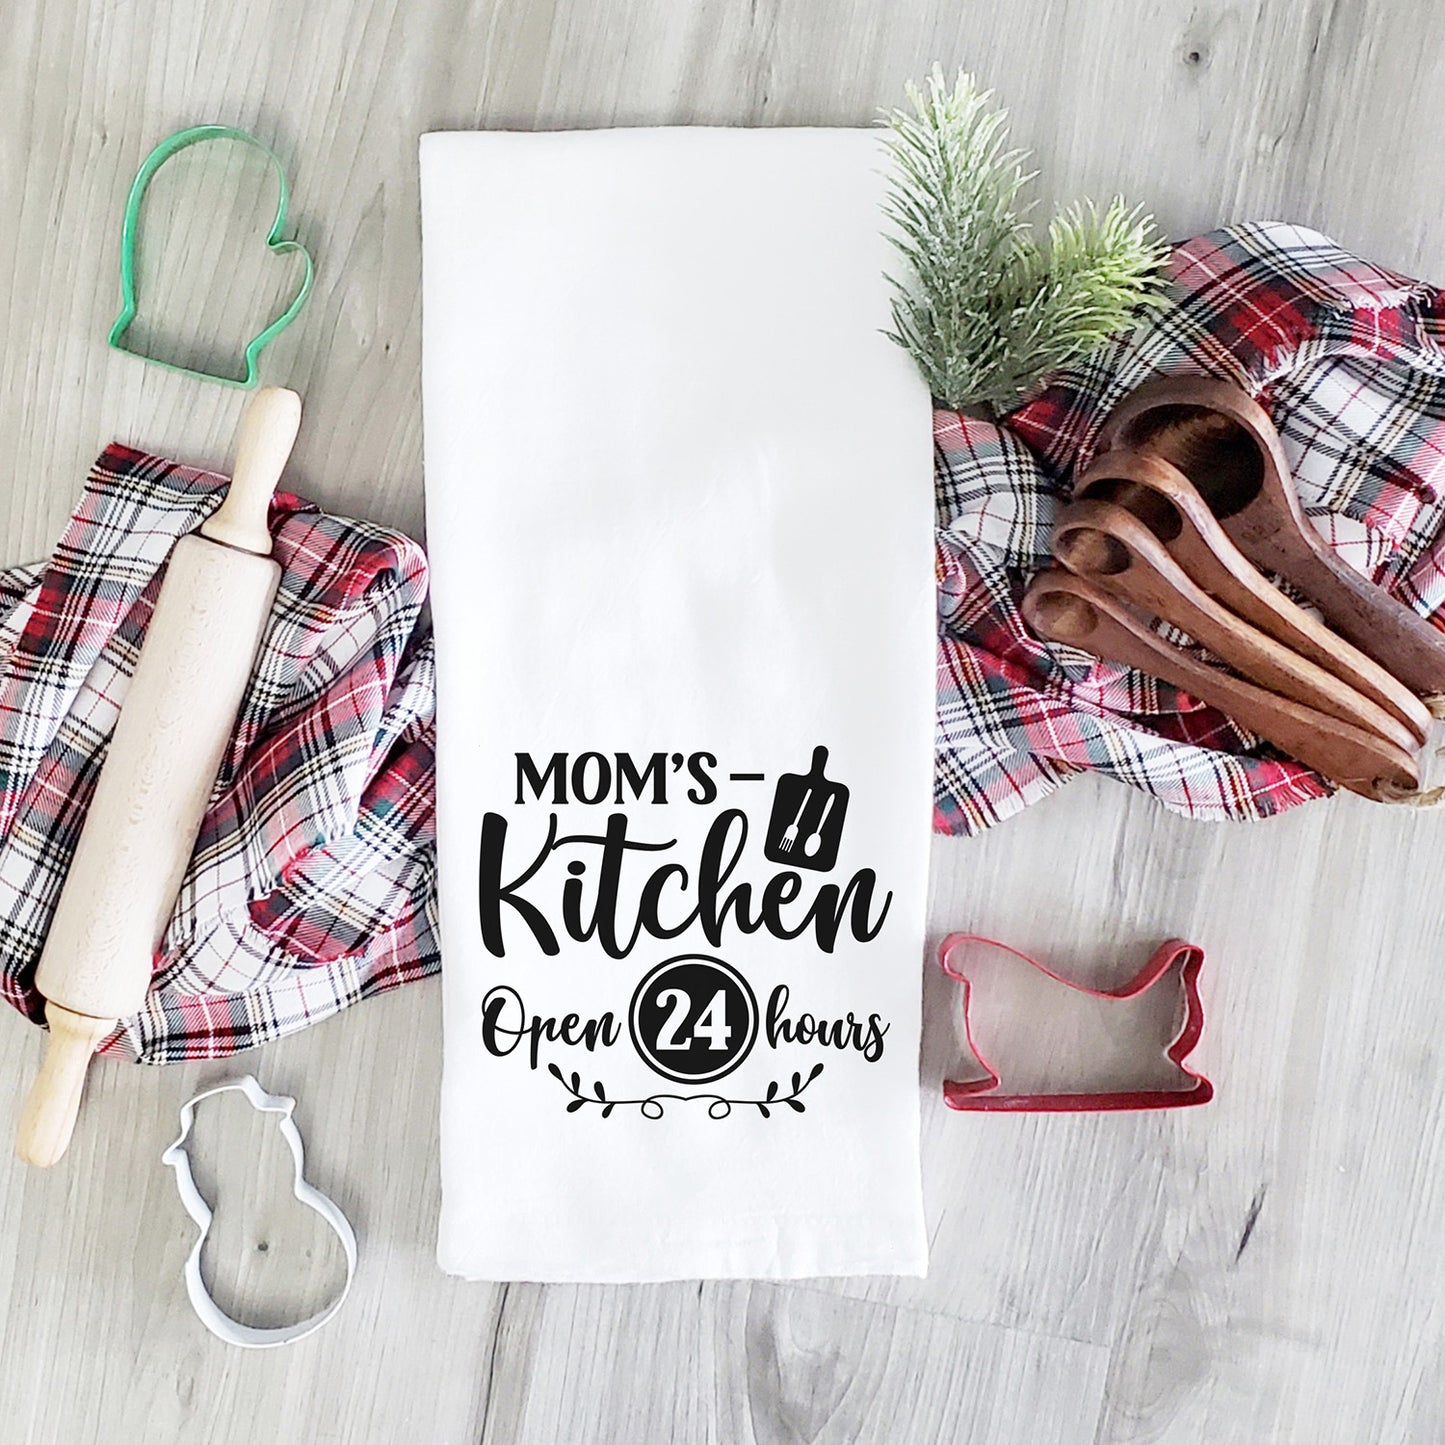 "Mom's Kitchen Open 24 Hours" Graphic